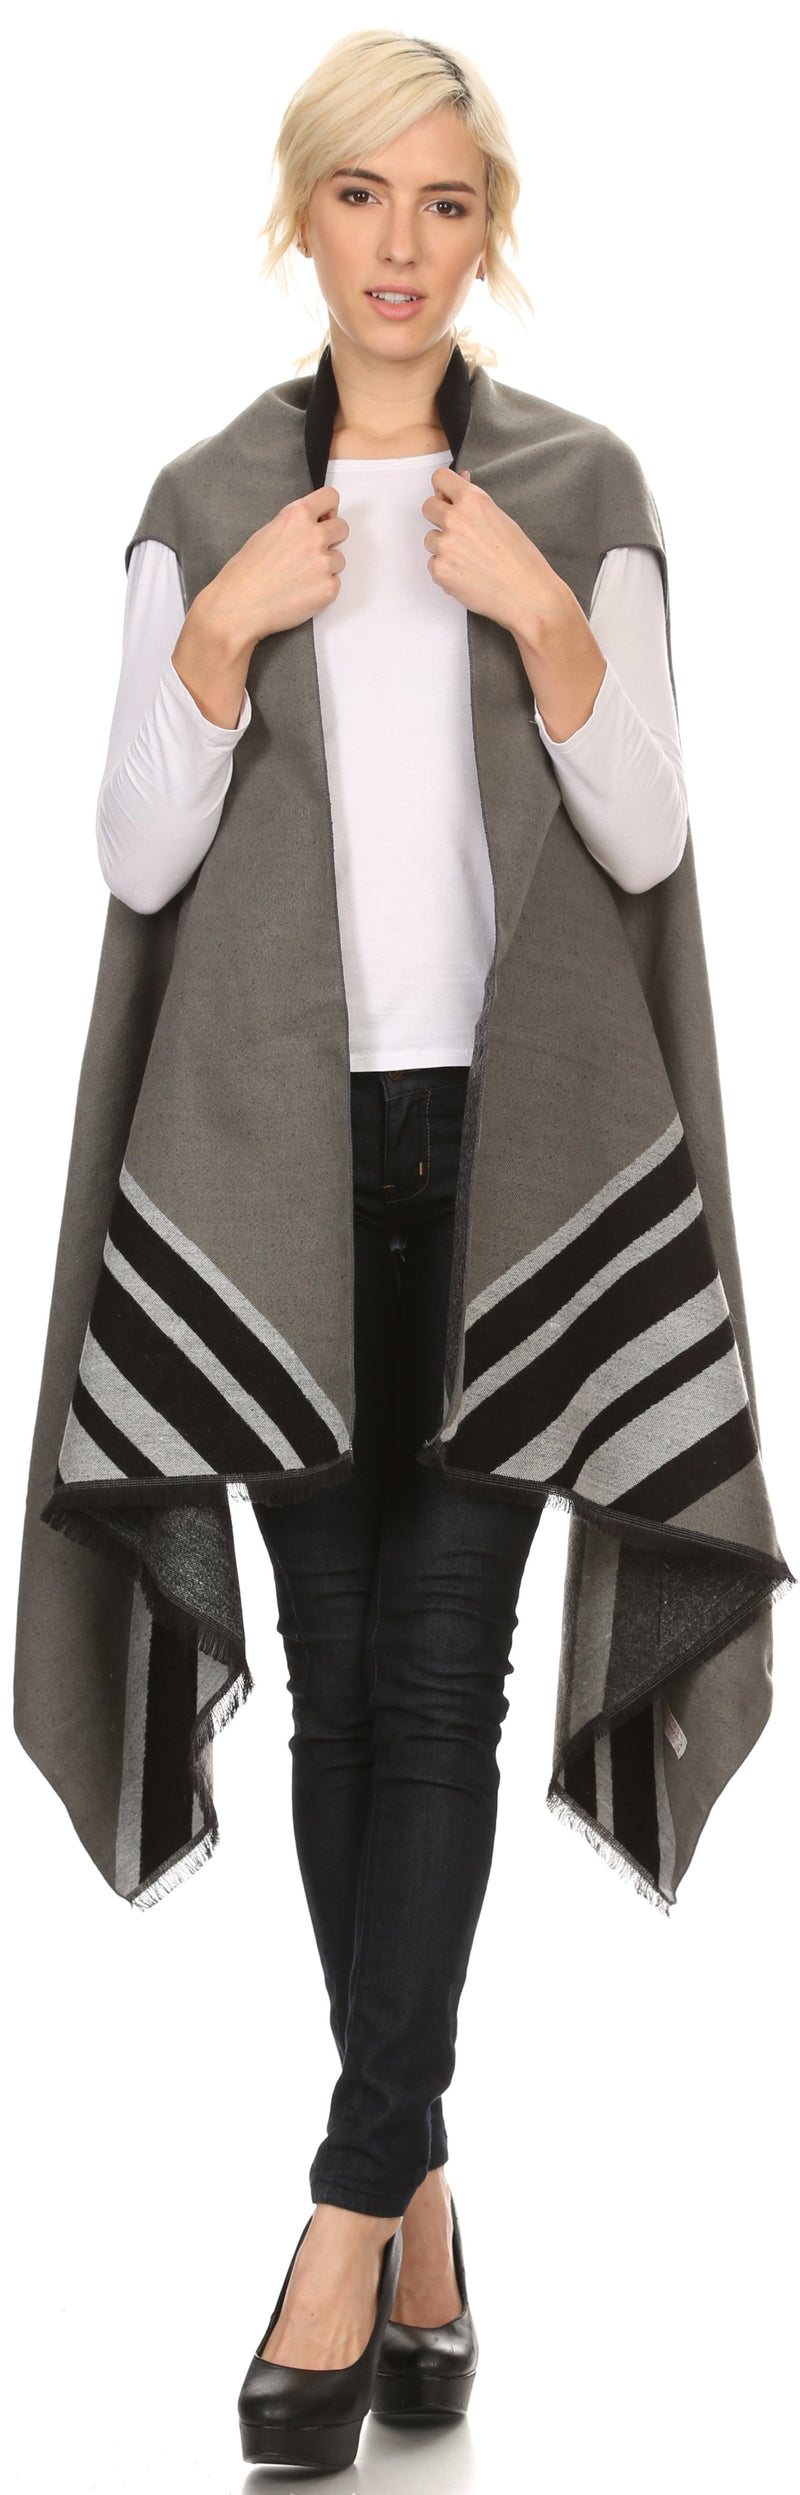 Sakkas Janeek Thick Warm Long Tapered Striped Multi Color Block Poncho Cape Wrap